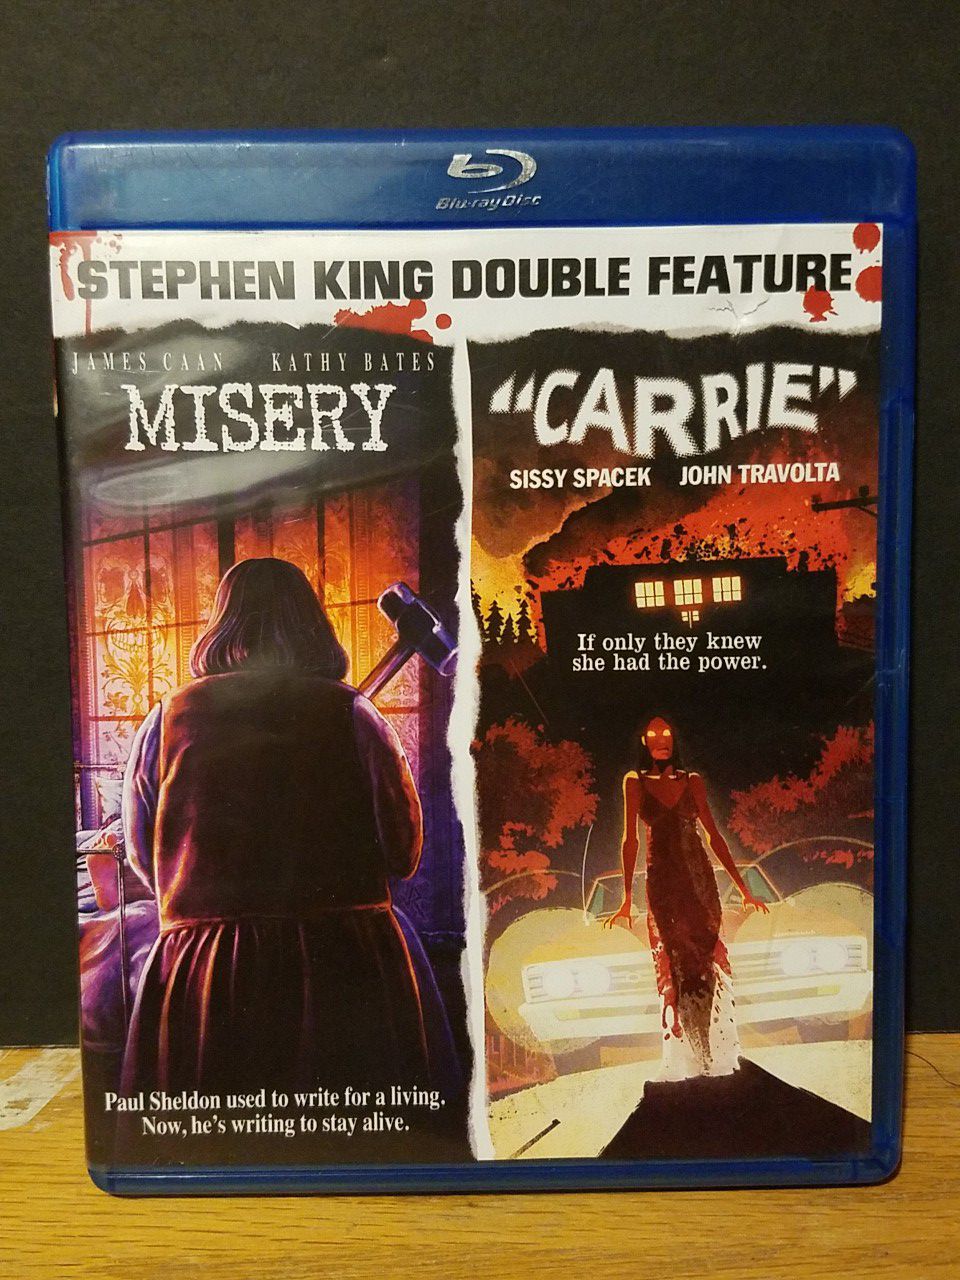 Stephen King double feature blu ray